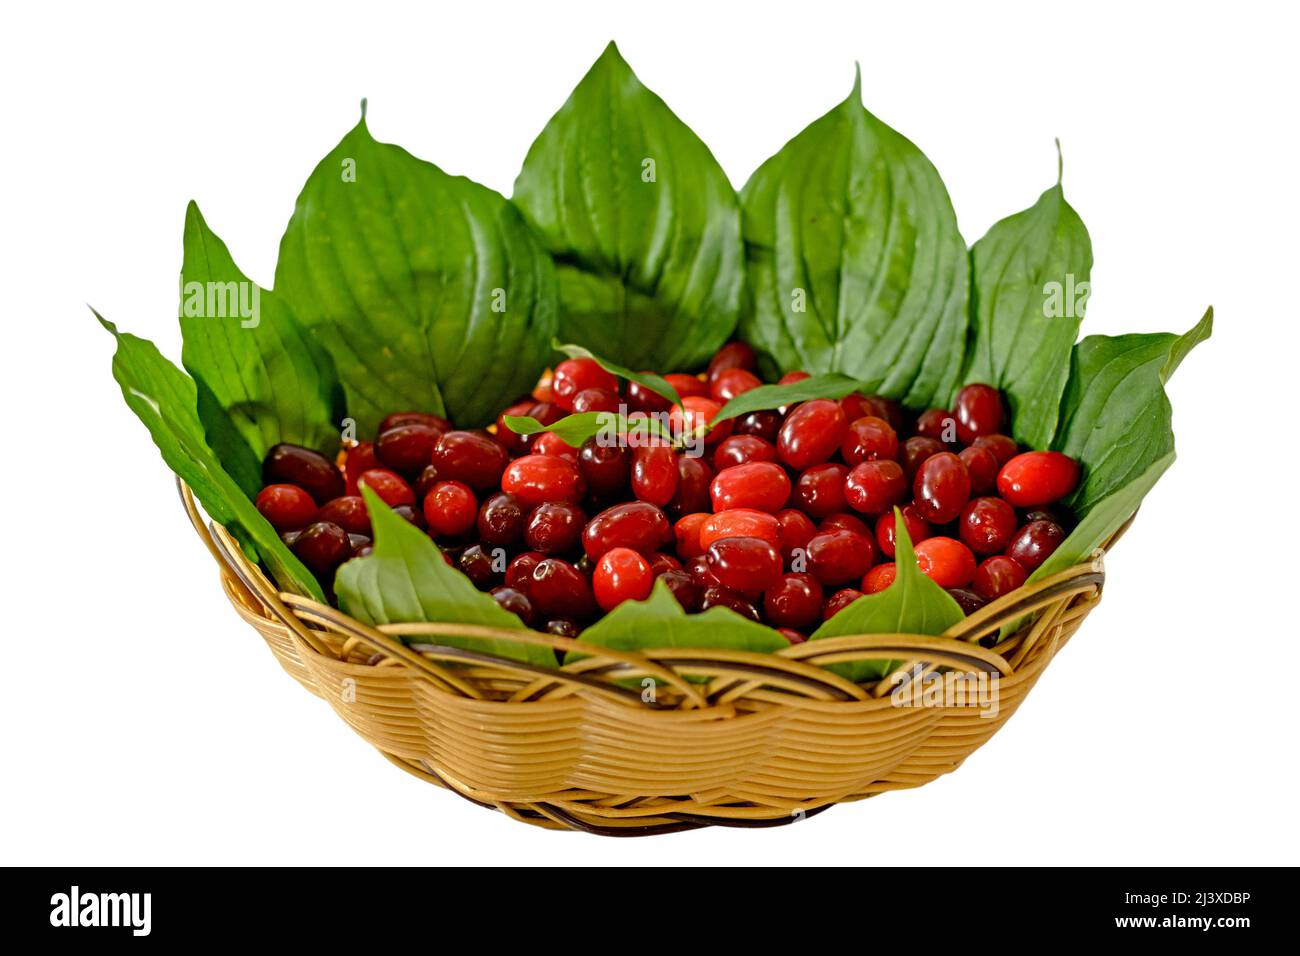 Red berries ripe dogwood in the basket with green leaves on the sides. Stock Photo